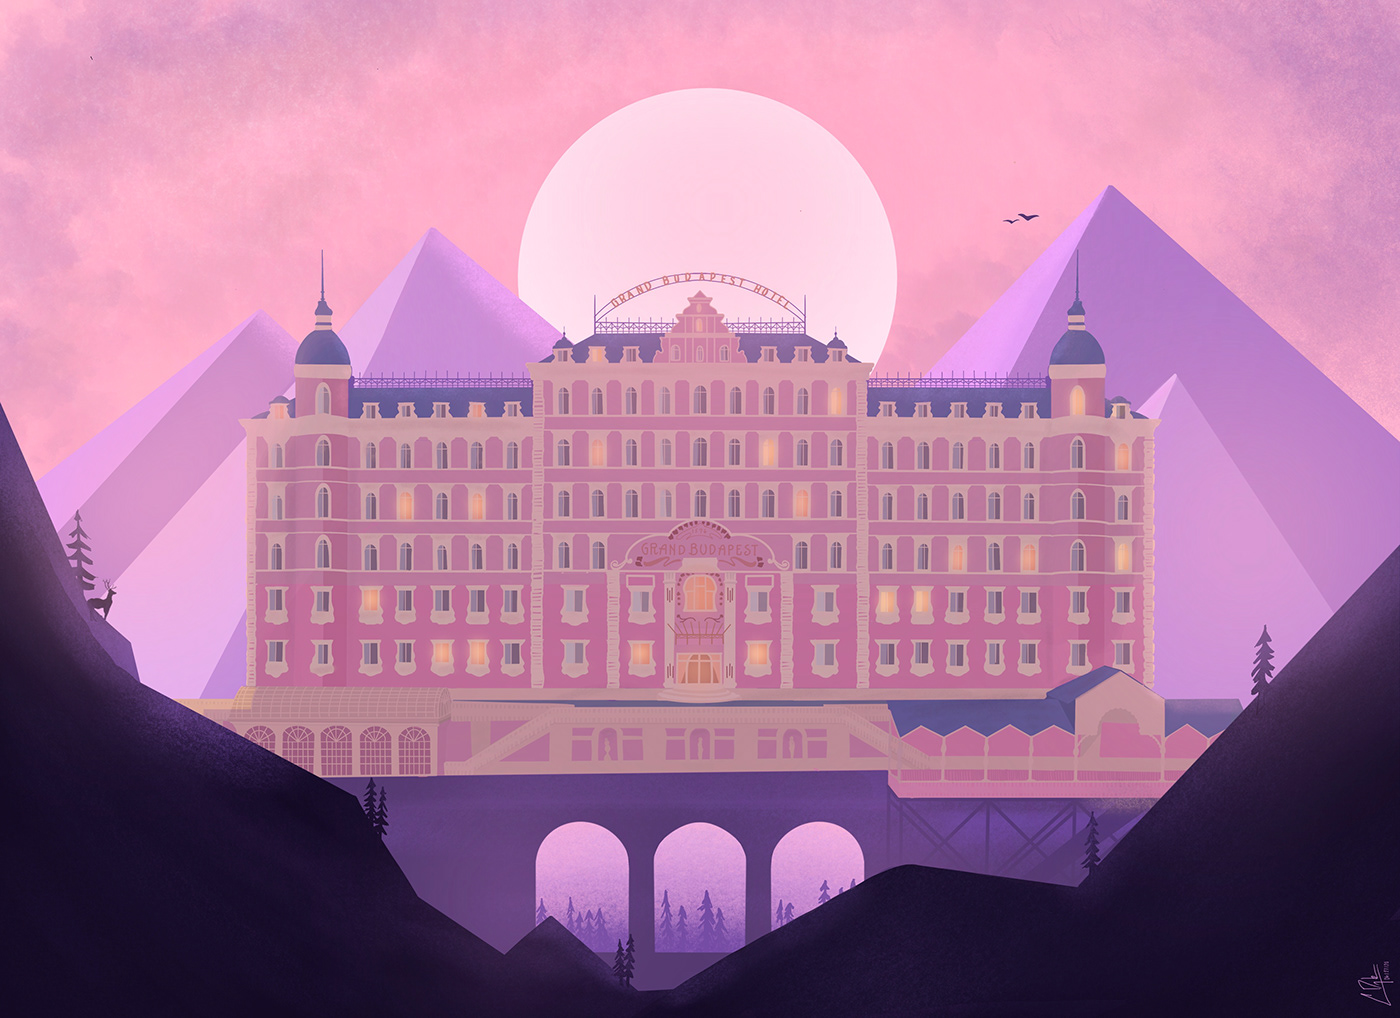 ang lee Film   grand budapest hotel life of pi movie wes anderson